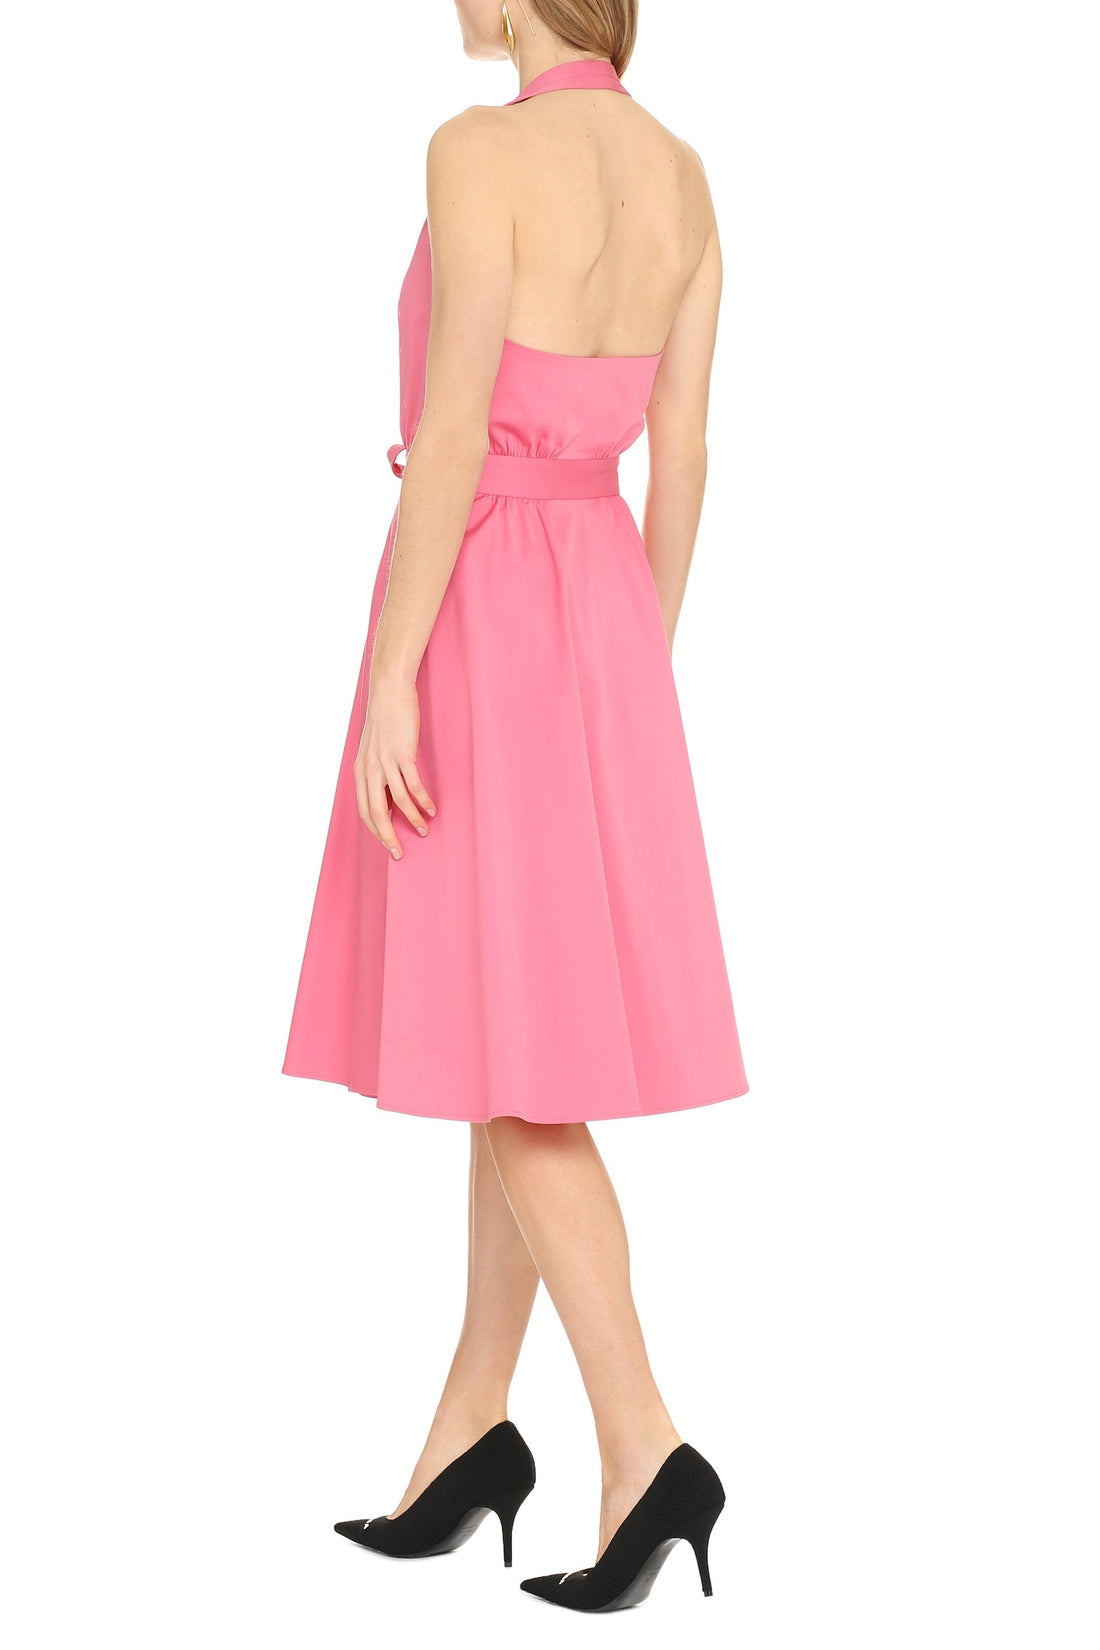 Moschino-OUTLET-SALE-A-line dress-ARCHIVIST